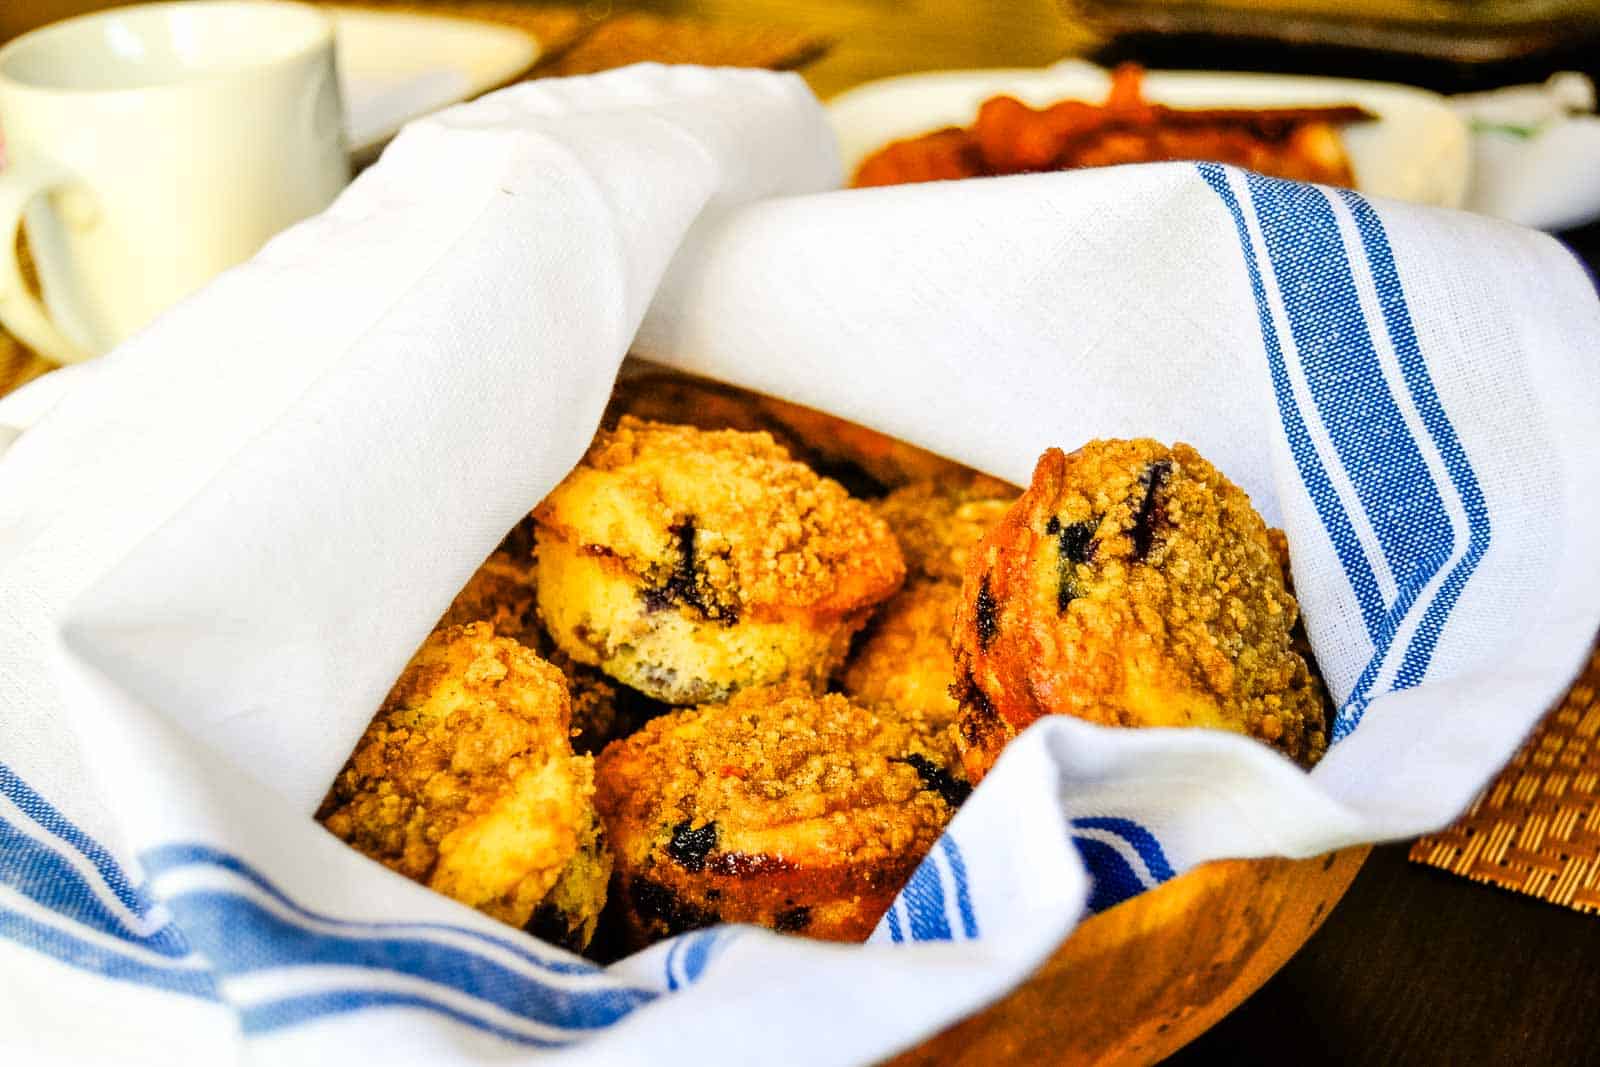 Blueberry muffins in a basket, wrapped in a white and blue towel.